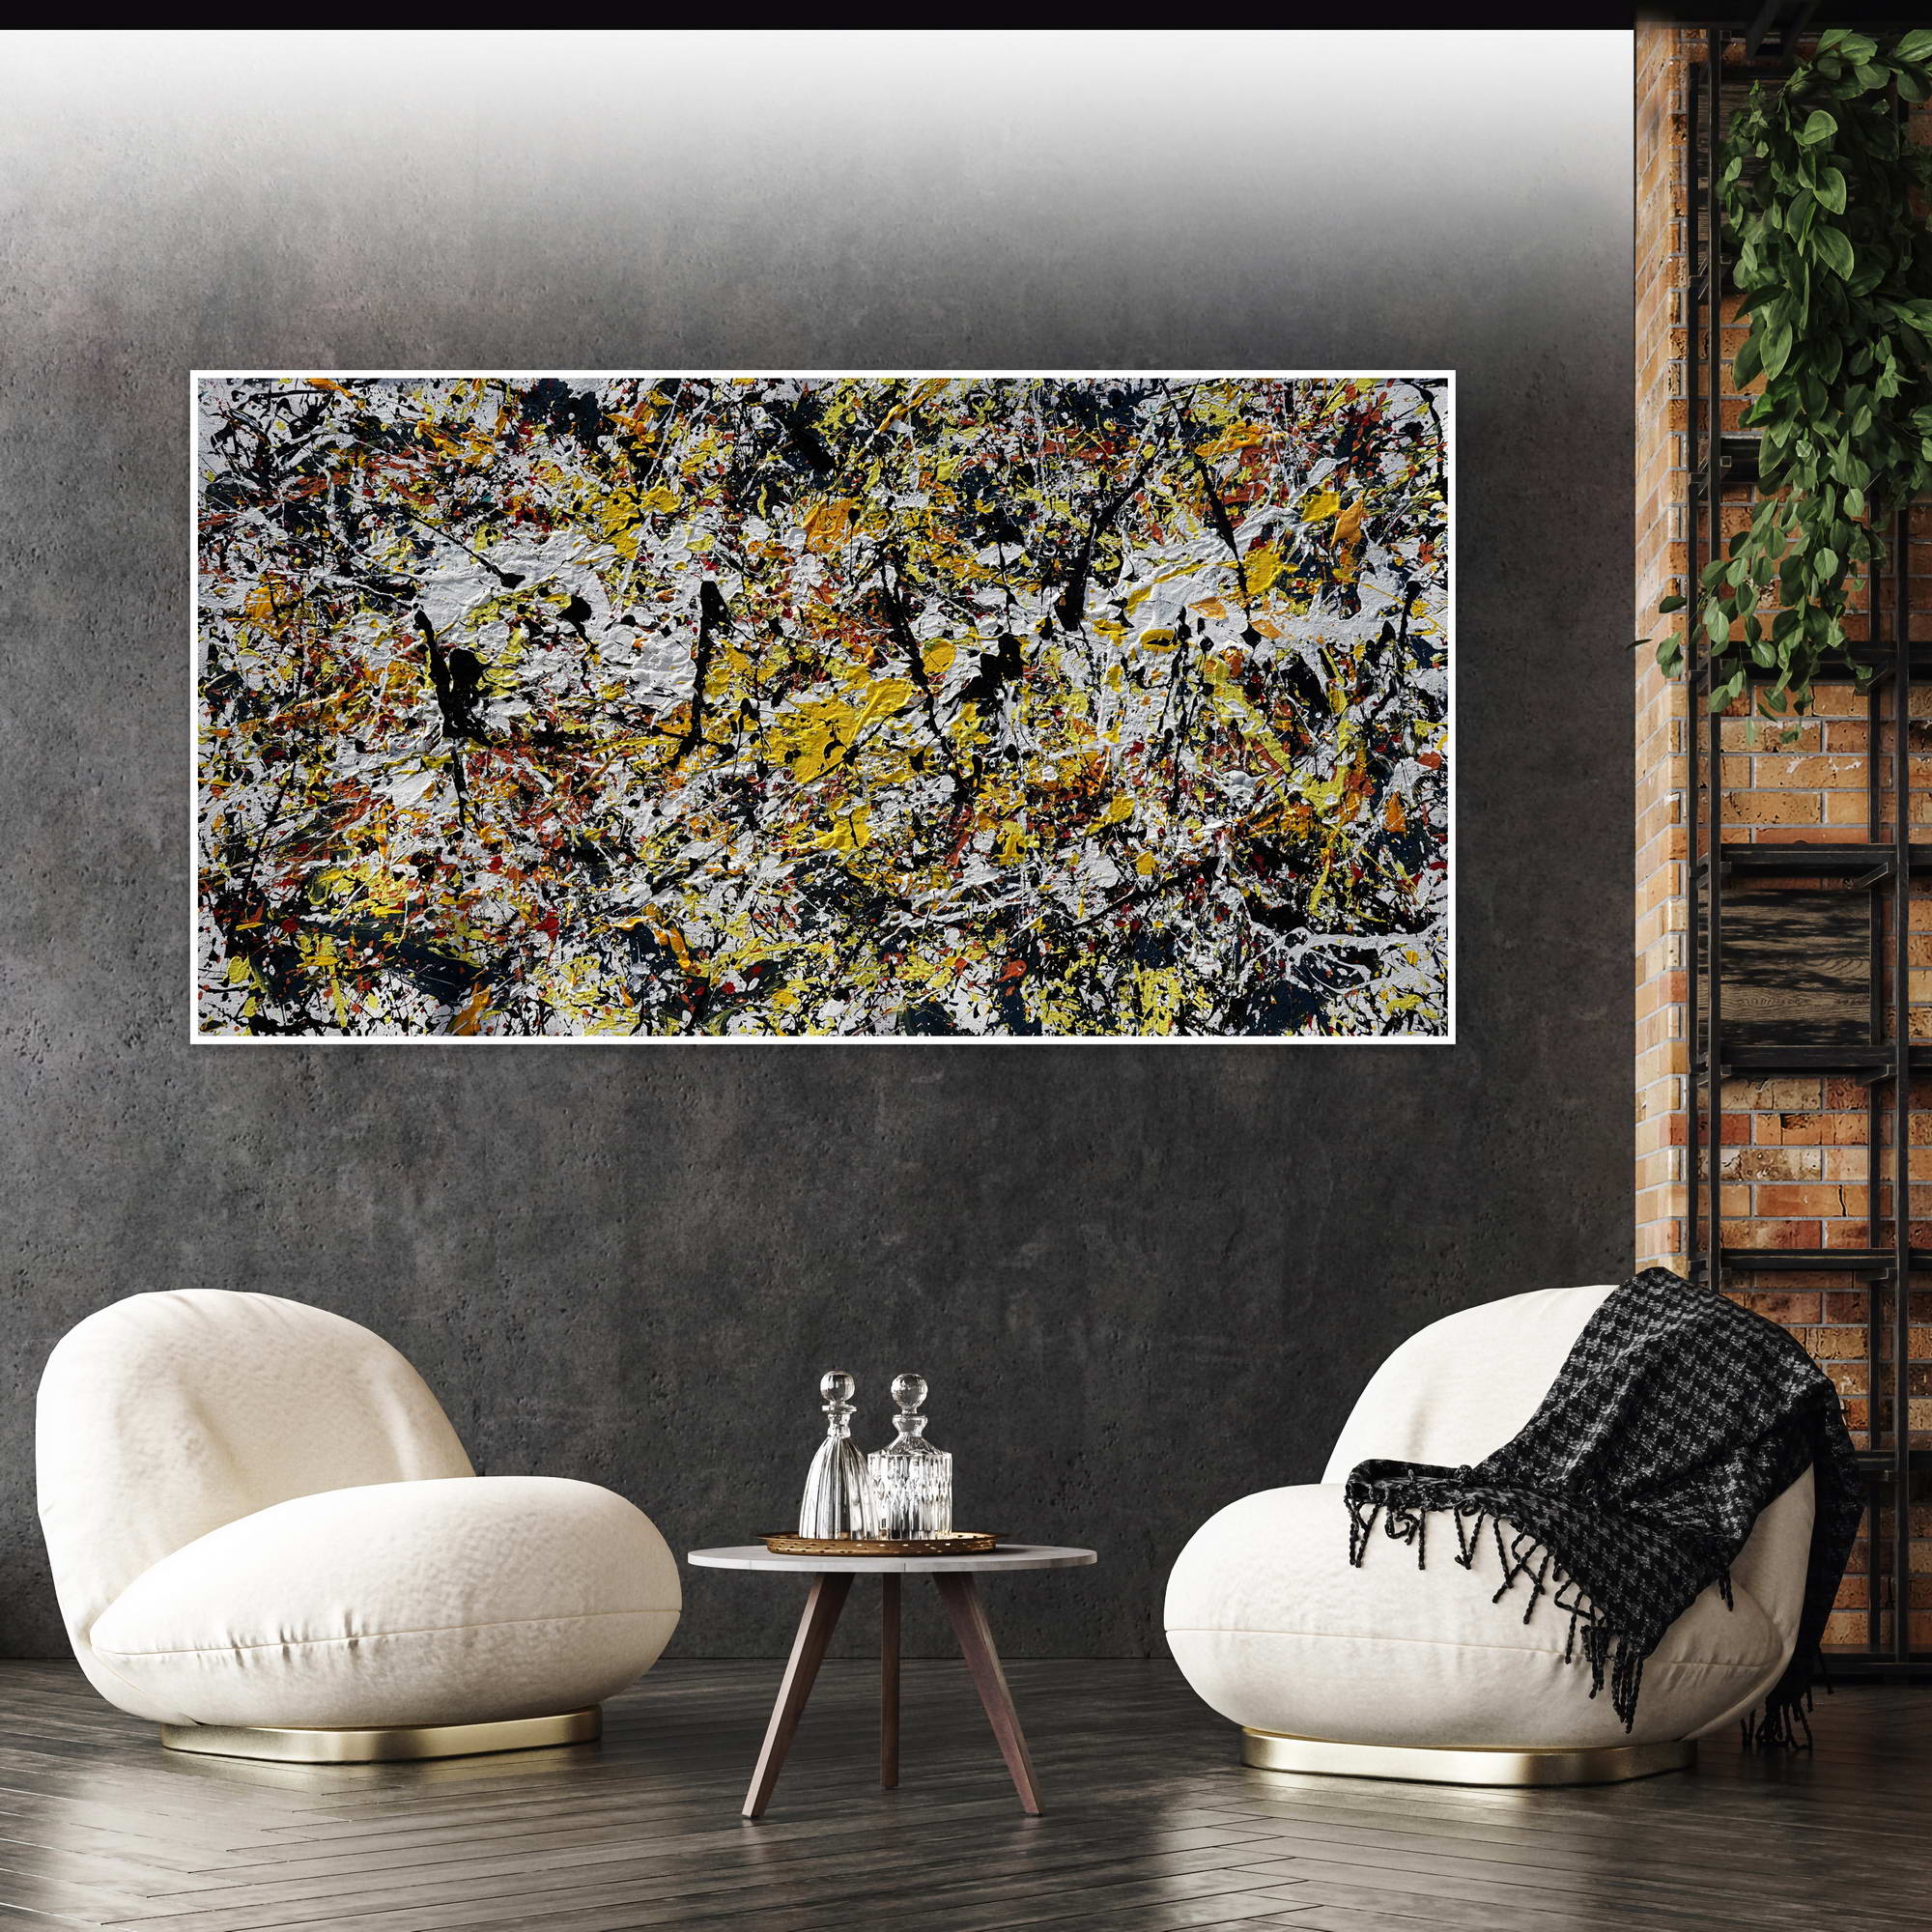 Hand painted Abstract Yellow and Black Pollock style 75x150cm